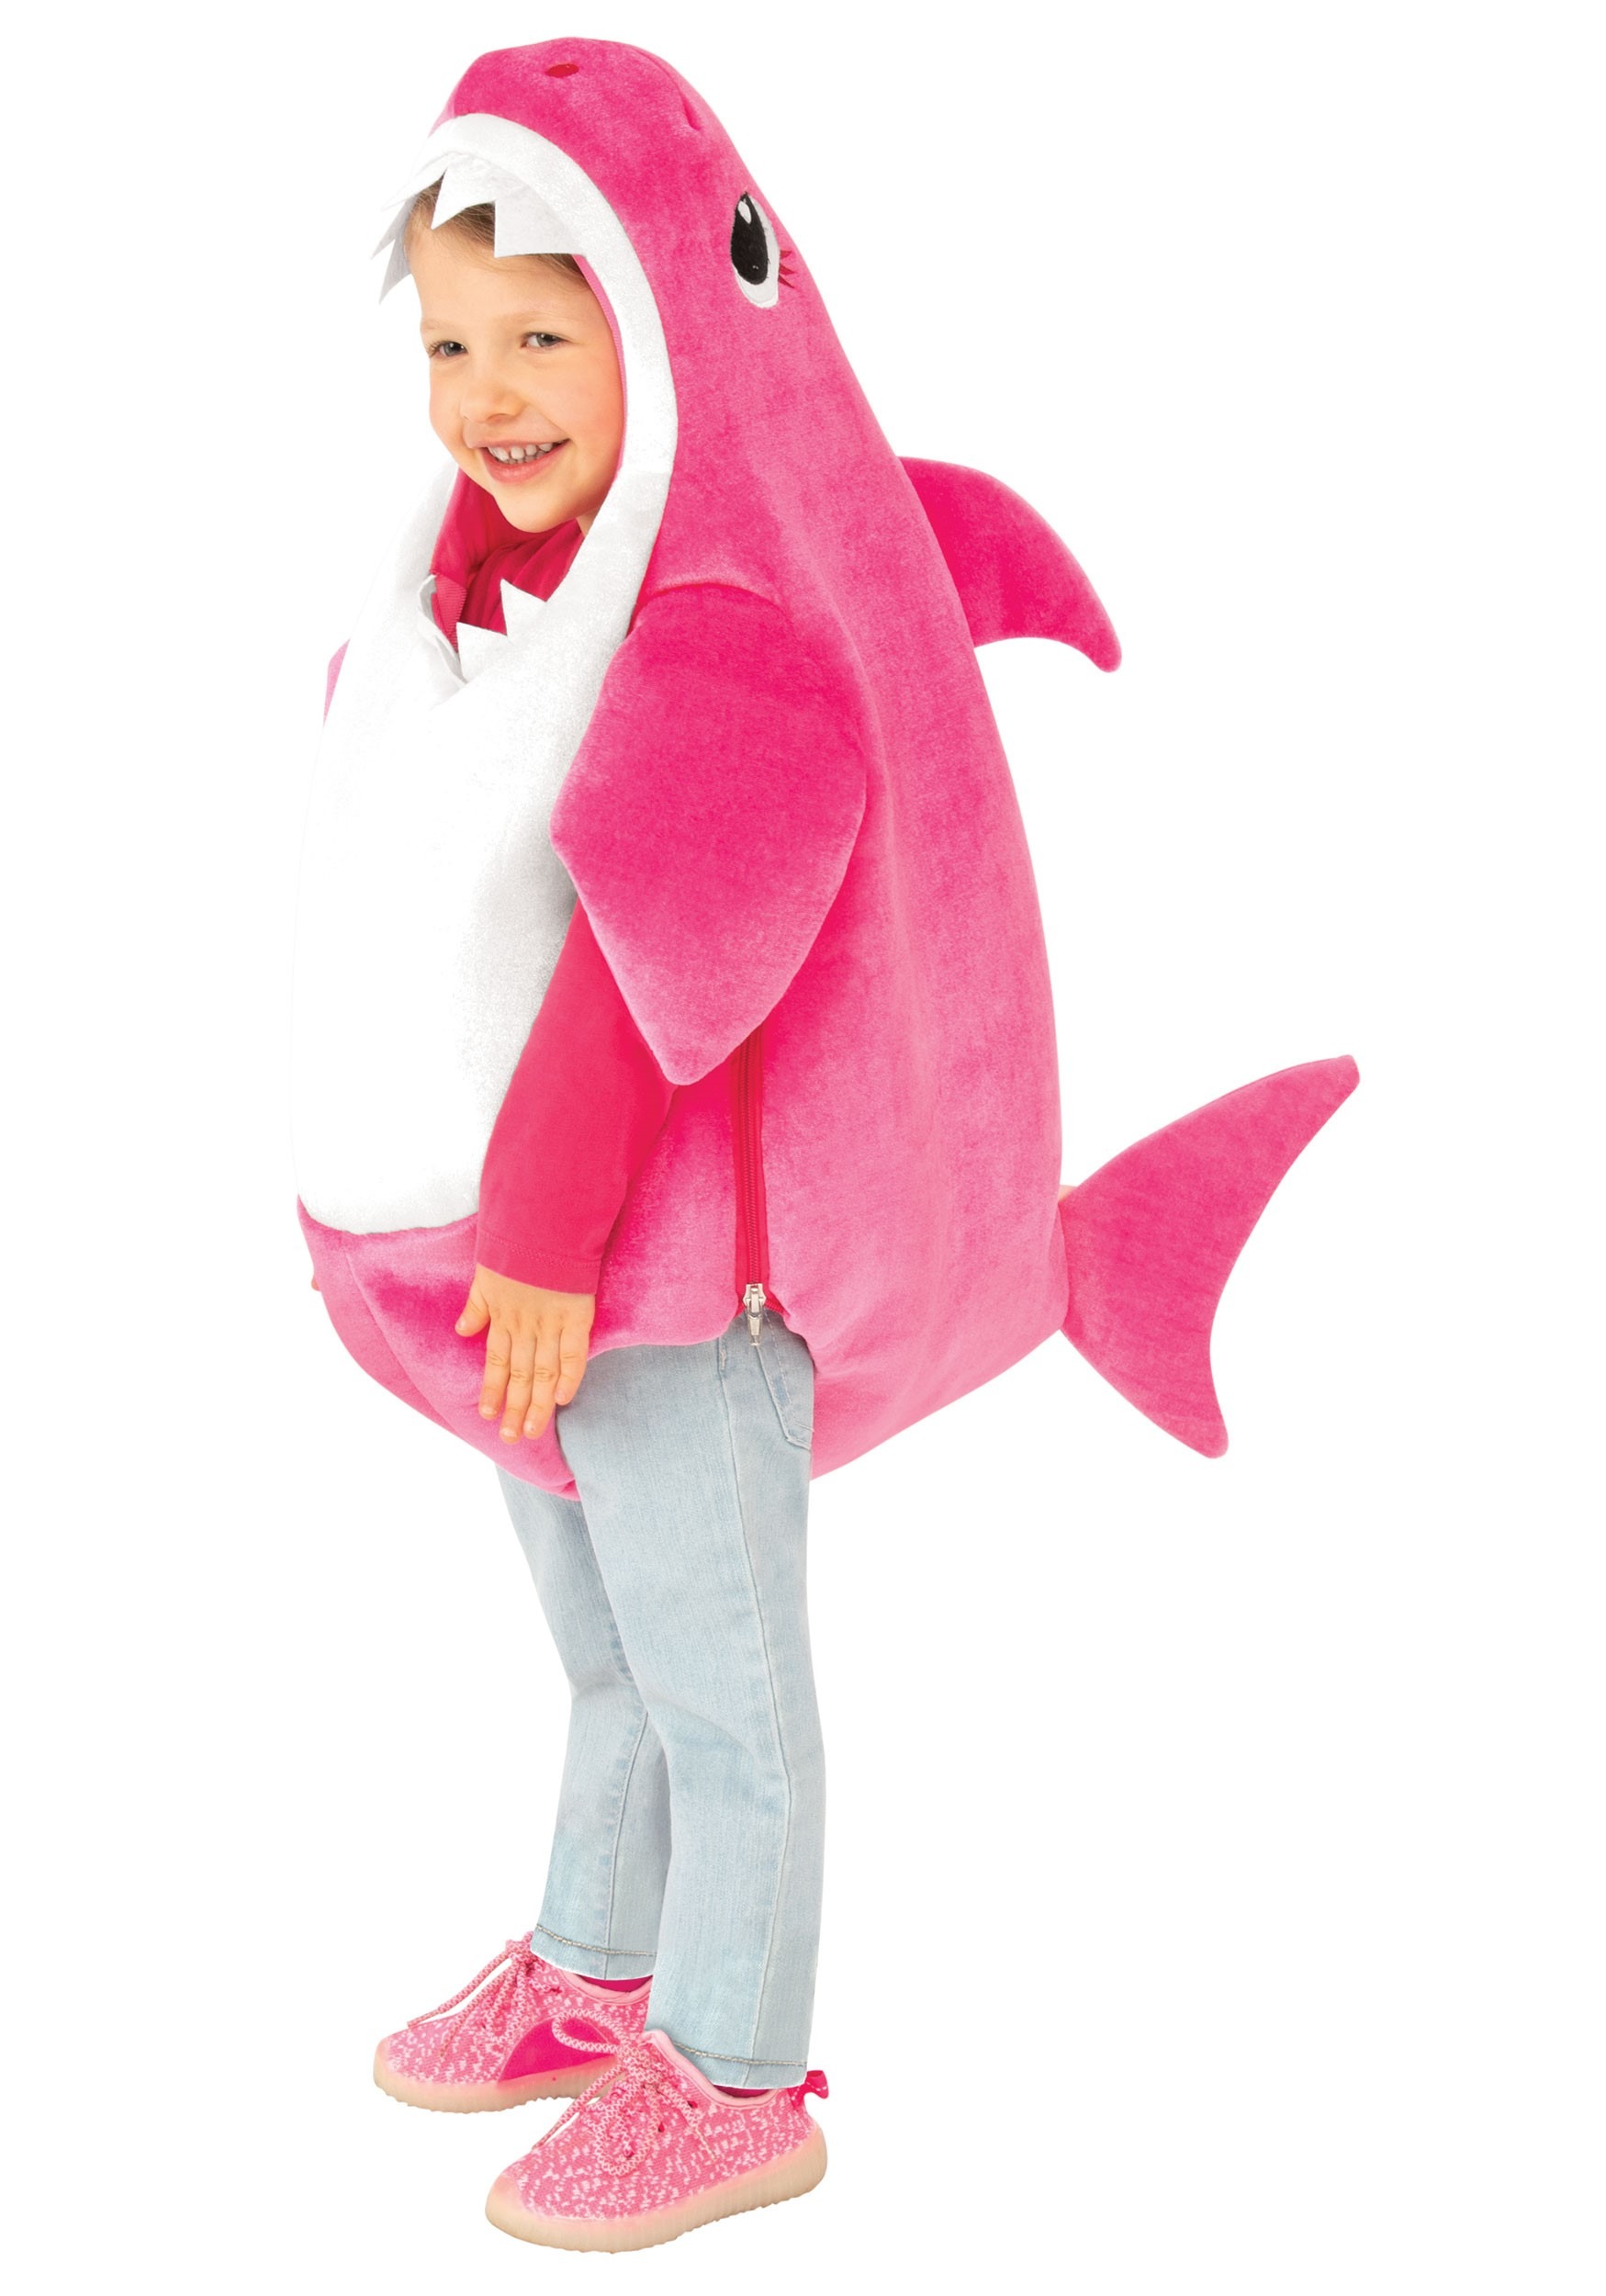 infant shark outfit